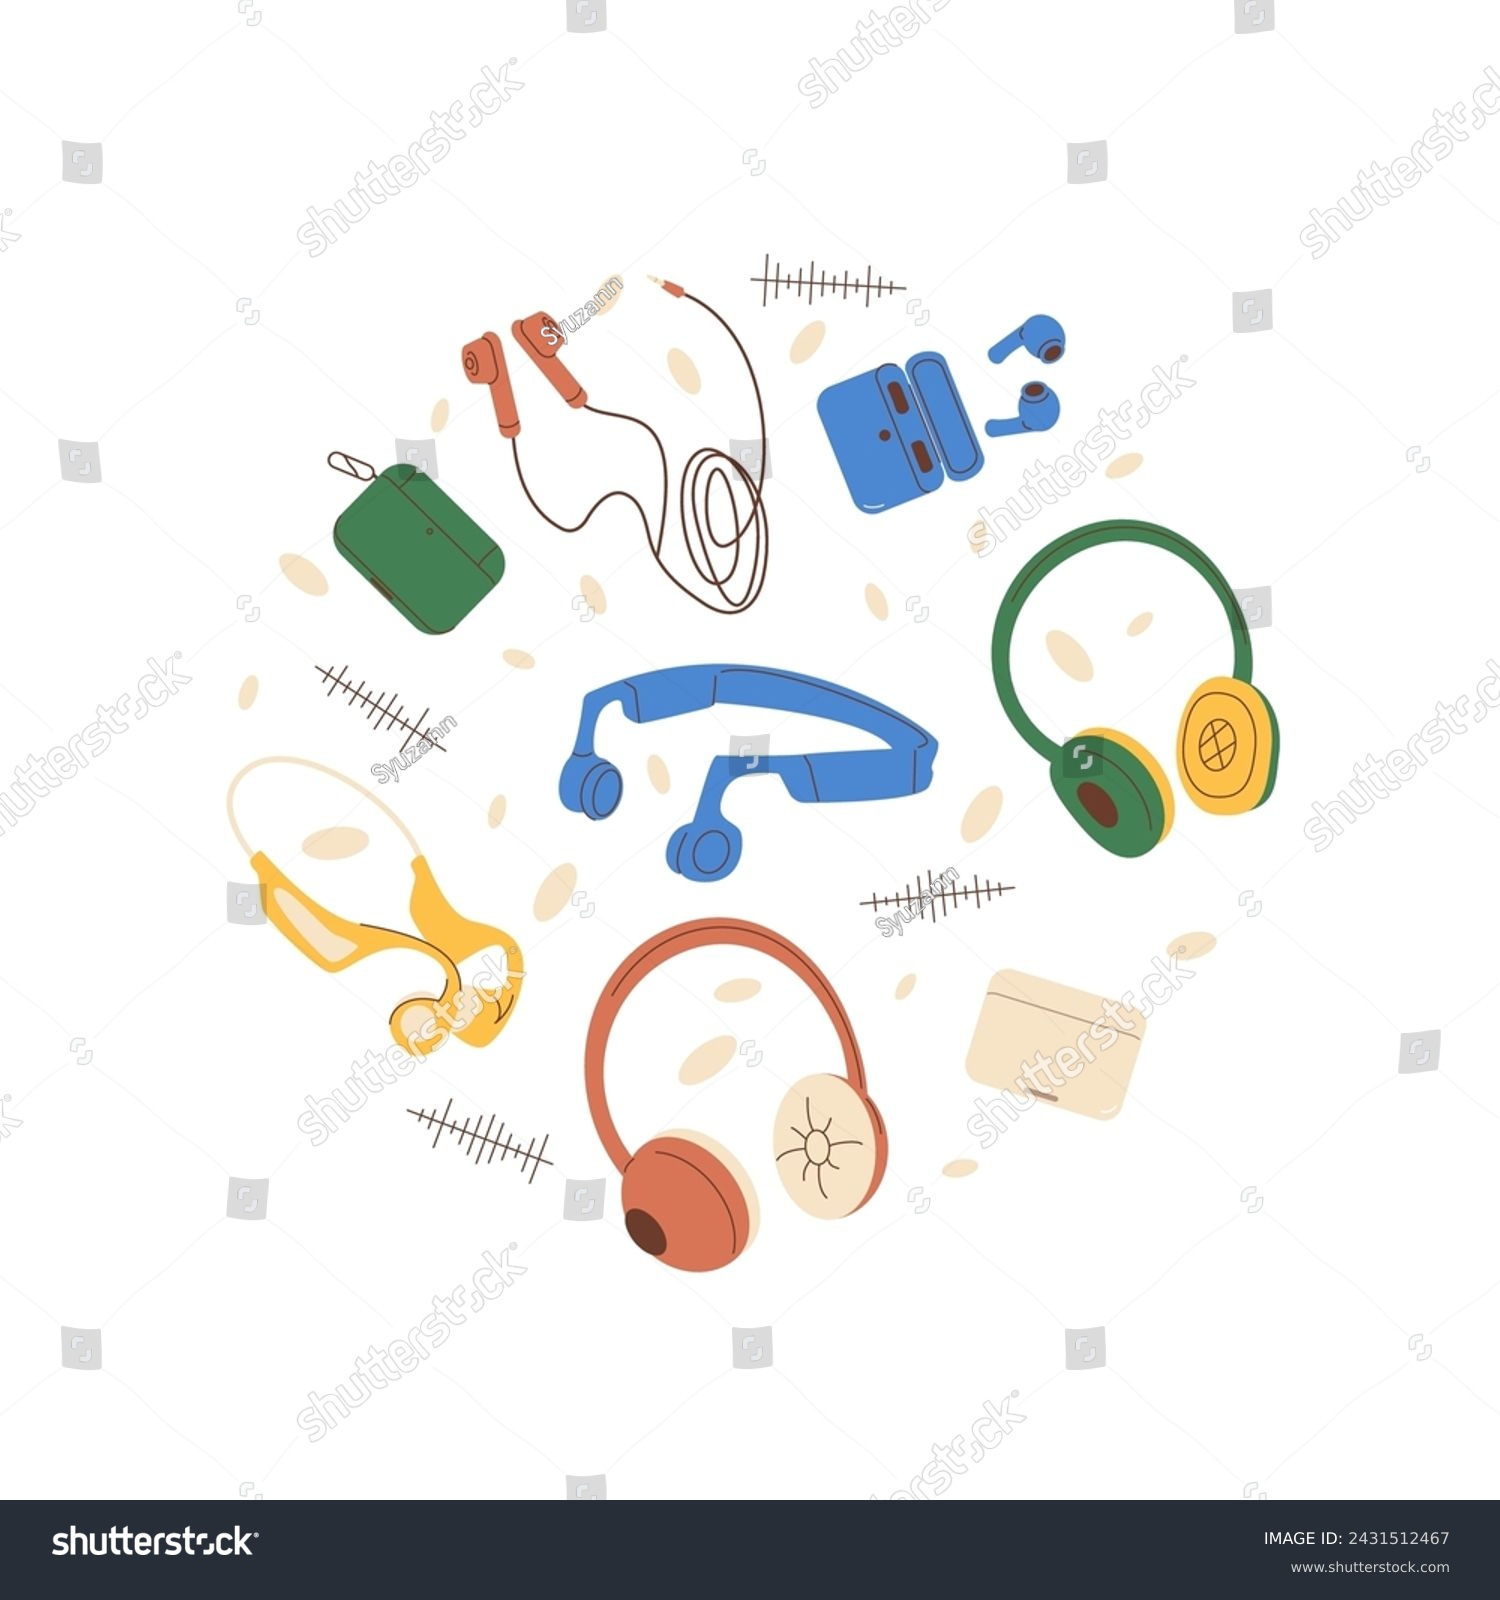 SVG of Headphones set circle emblem isolated on white background. Wired, wireless and bone conduction audio equipment for music listening round emblem. Vector flat illustration. svg